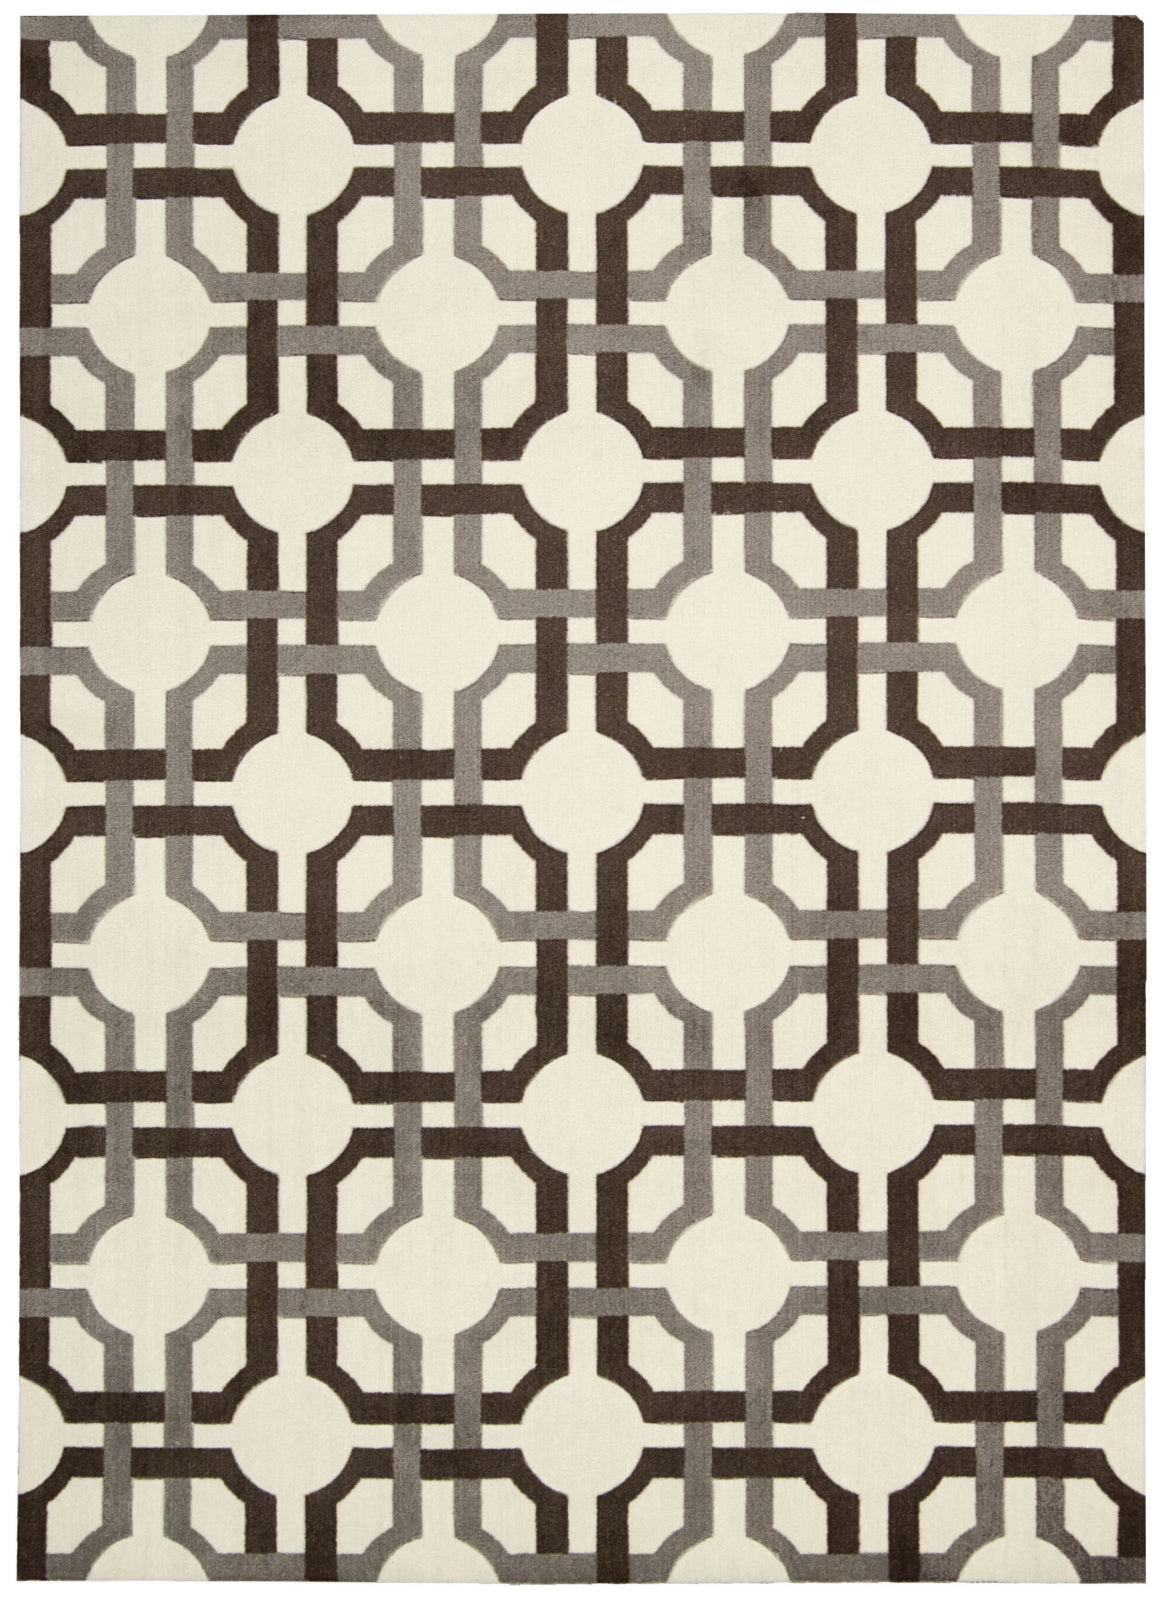 Nourison Artisanal Delight WAD09 Groovy Grille Tobacco Area Rug by Waverly main image